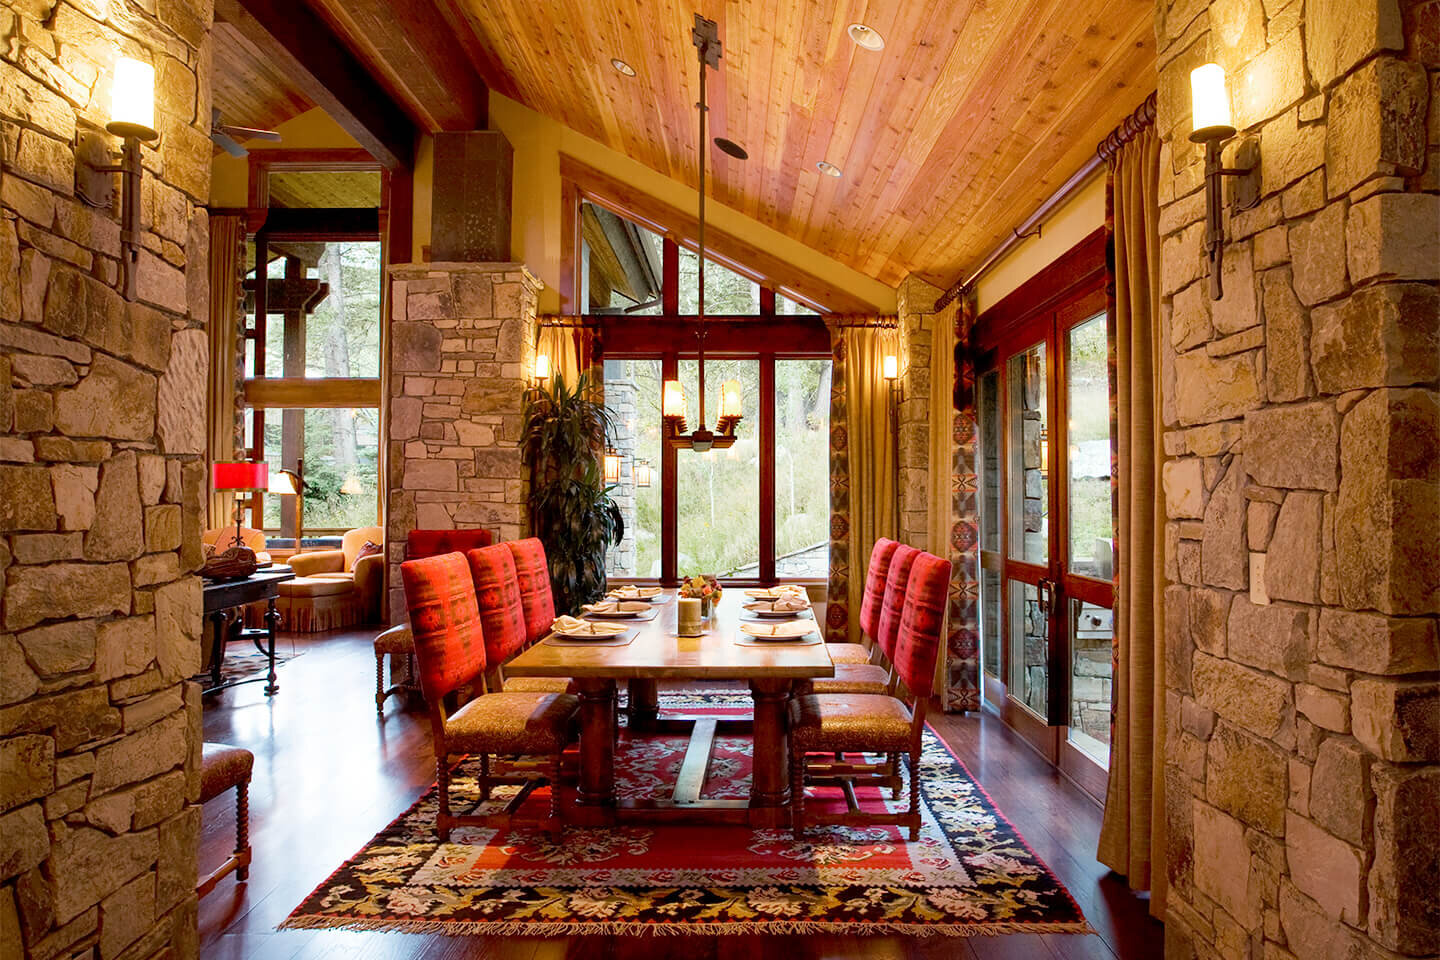 Dining room with red chairs and native stone walls